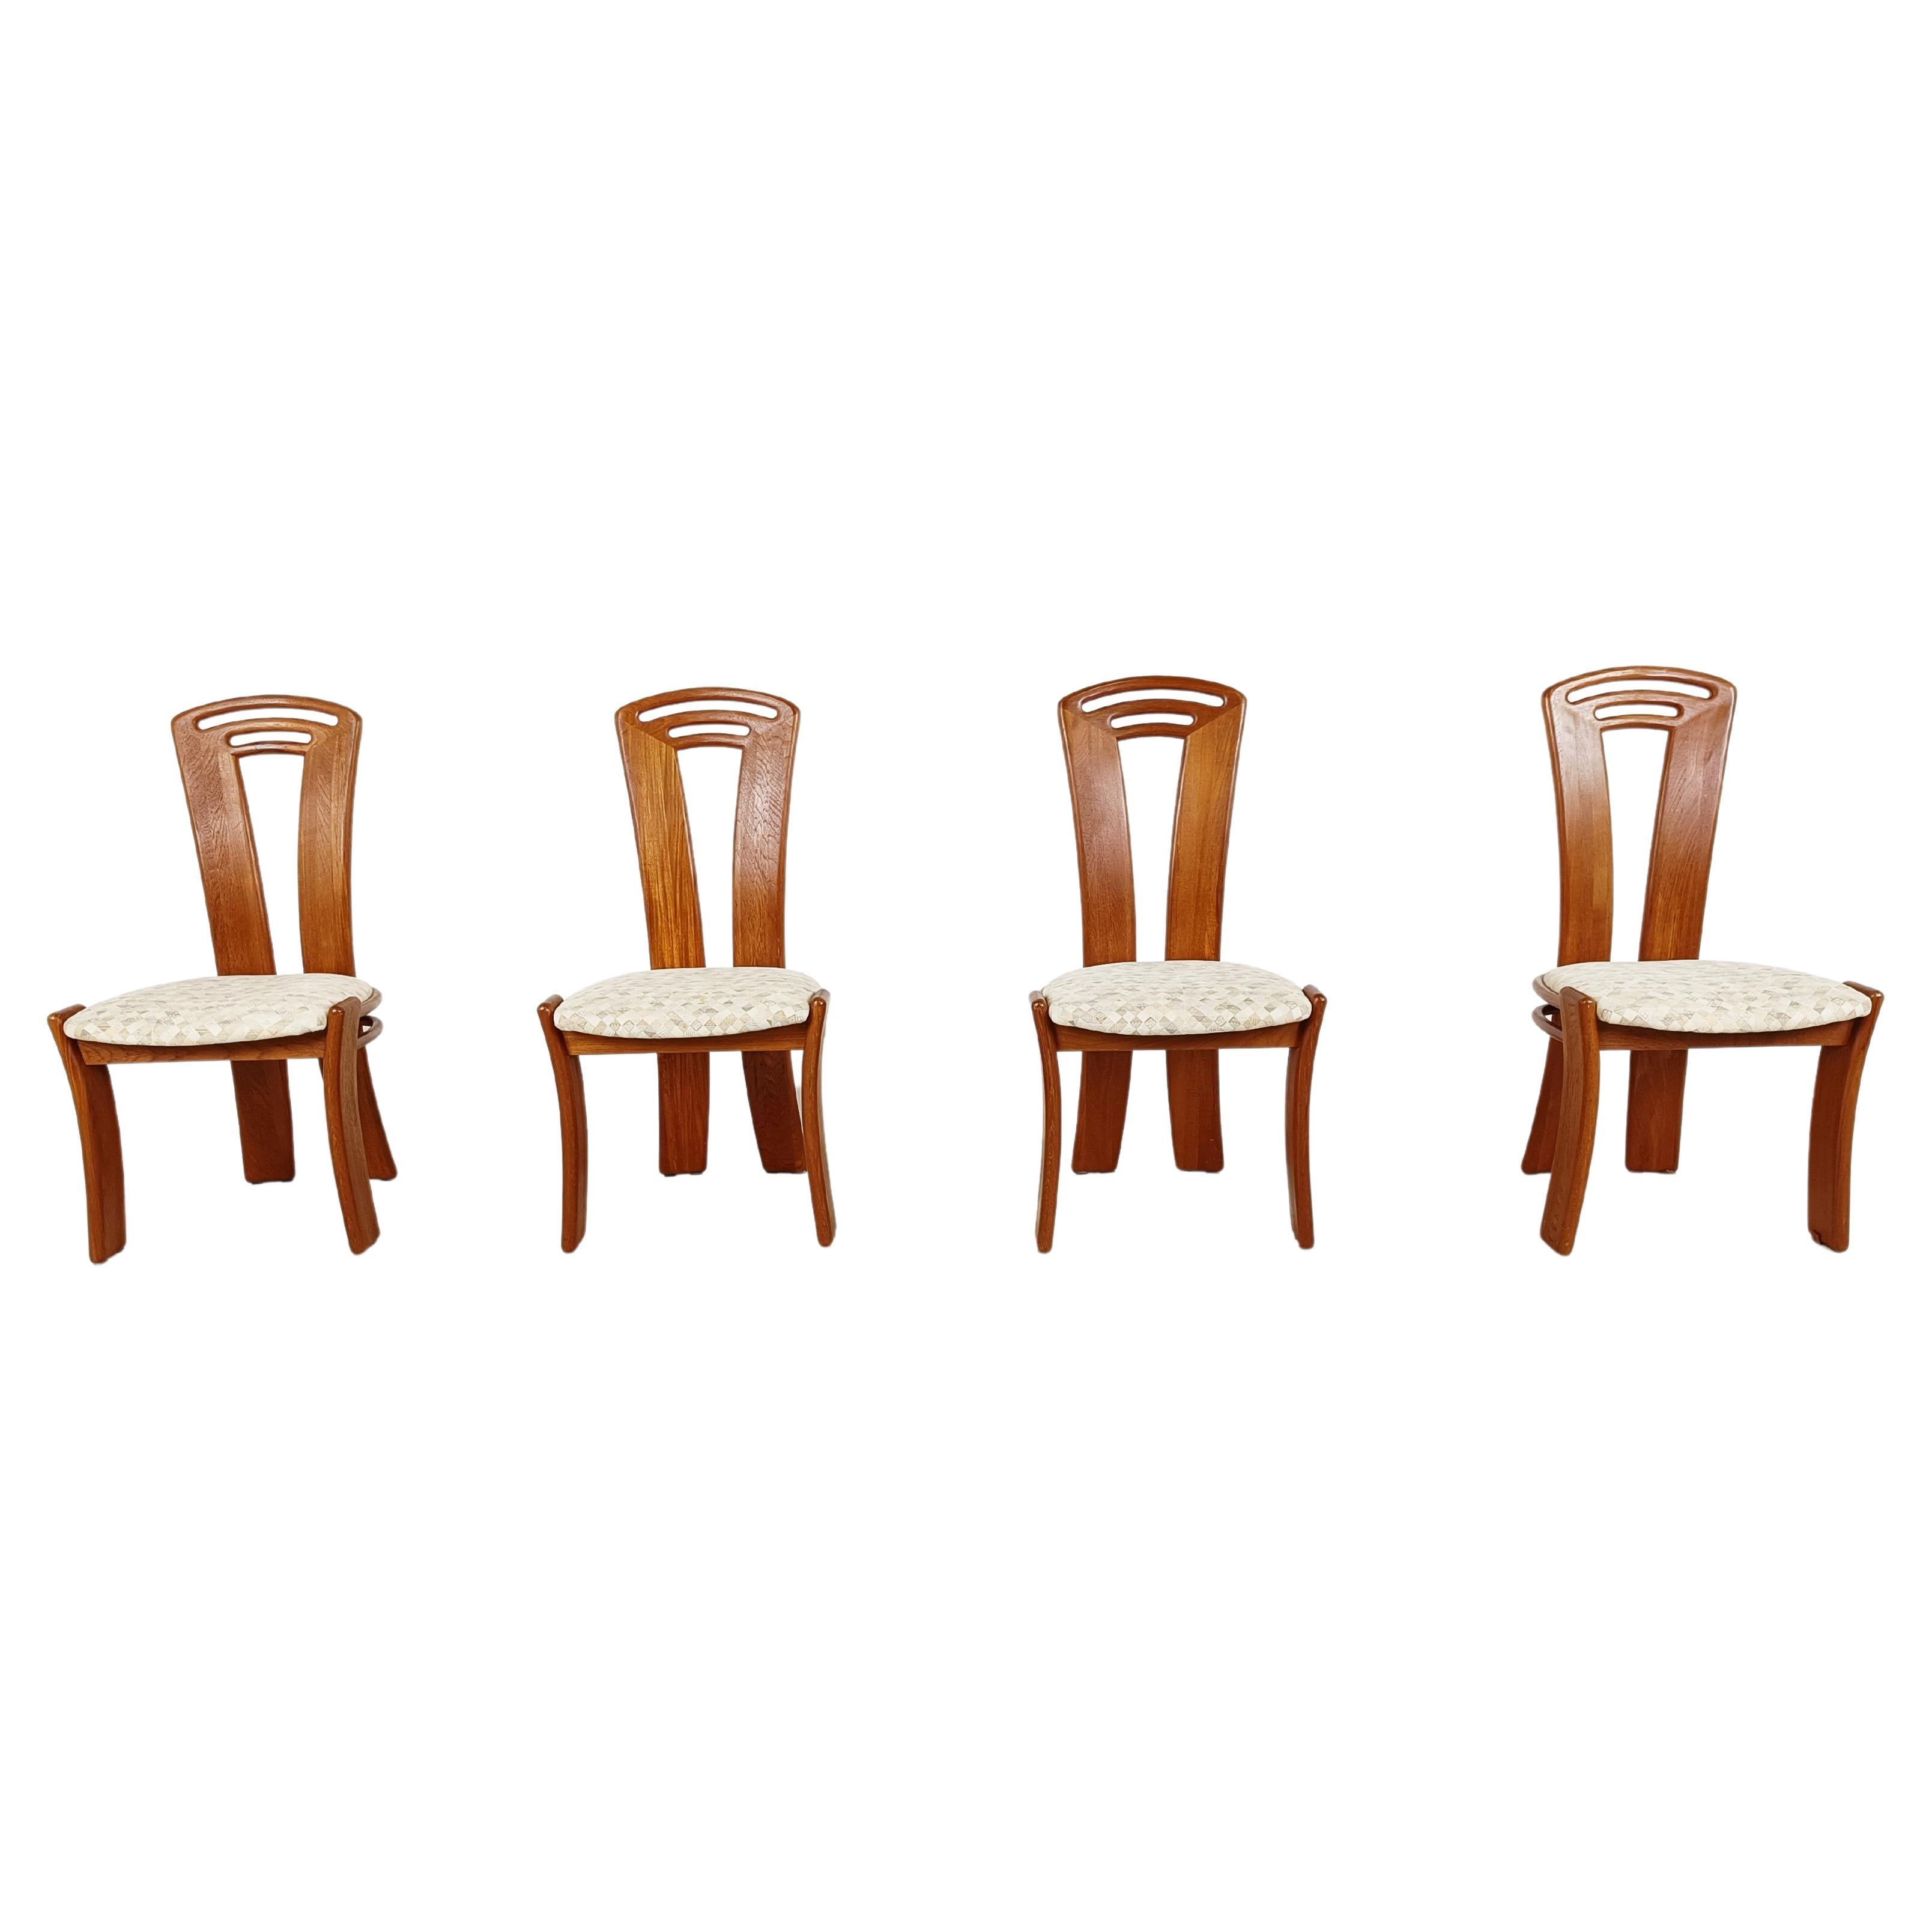 Set of 4 Vintage Scandinavian Dining Chairs, 1960s For Sale